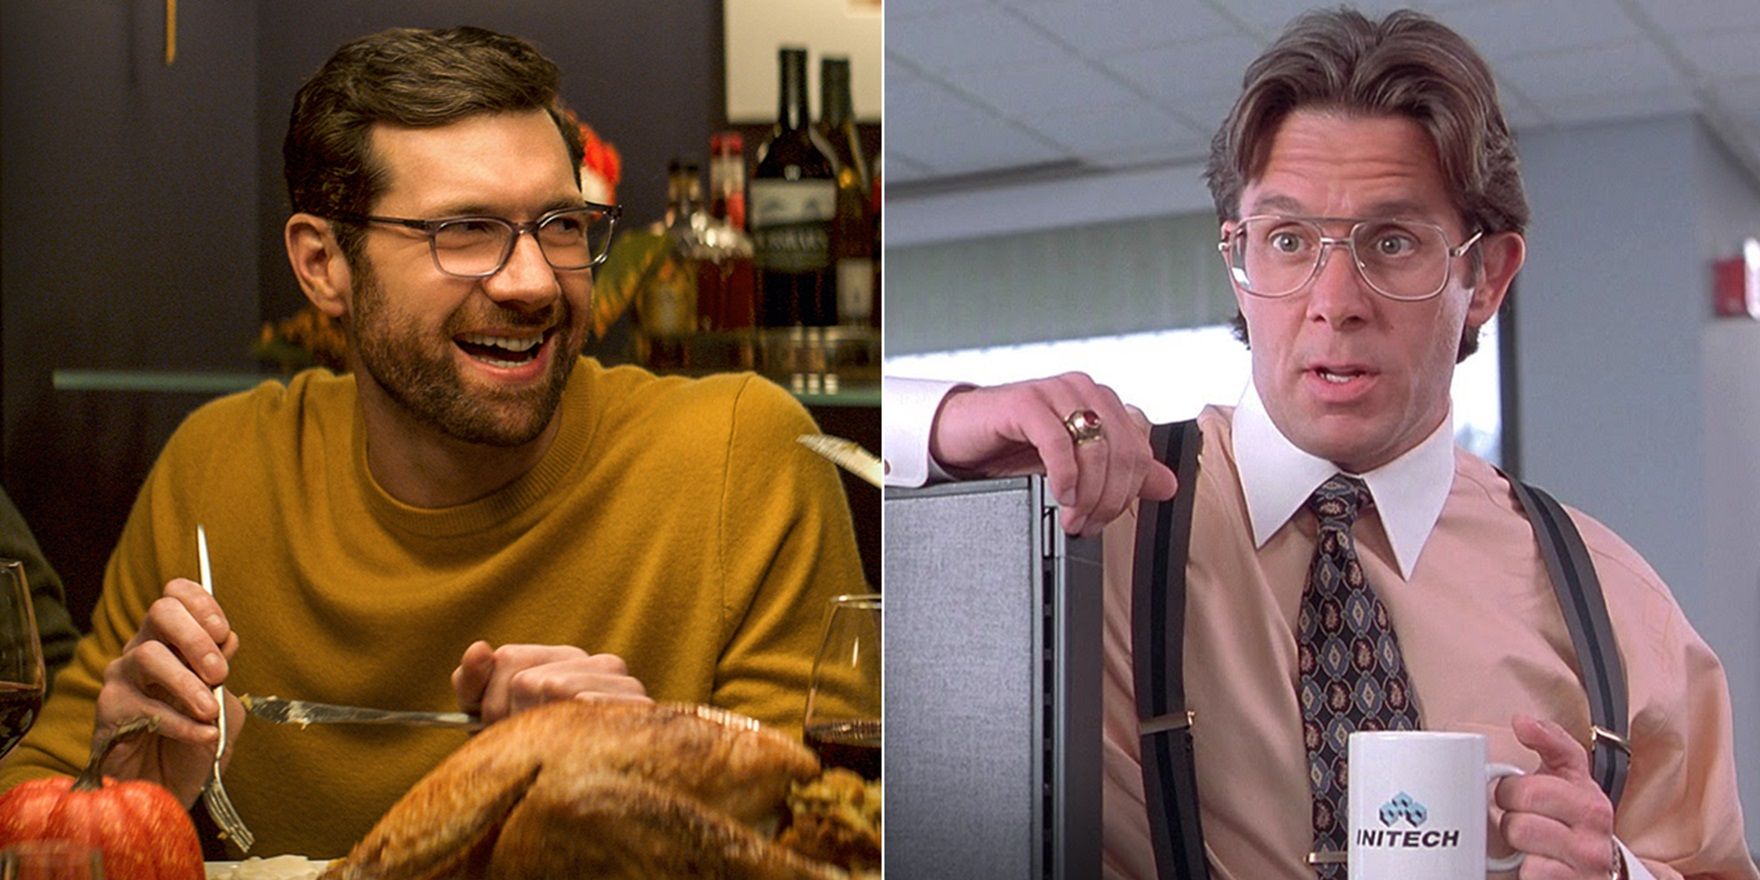 Split_image_of_Bobby_eating_dinner_in_Bros_and_Lumbergh_in_an_office_cubicle_in_Office_Space